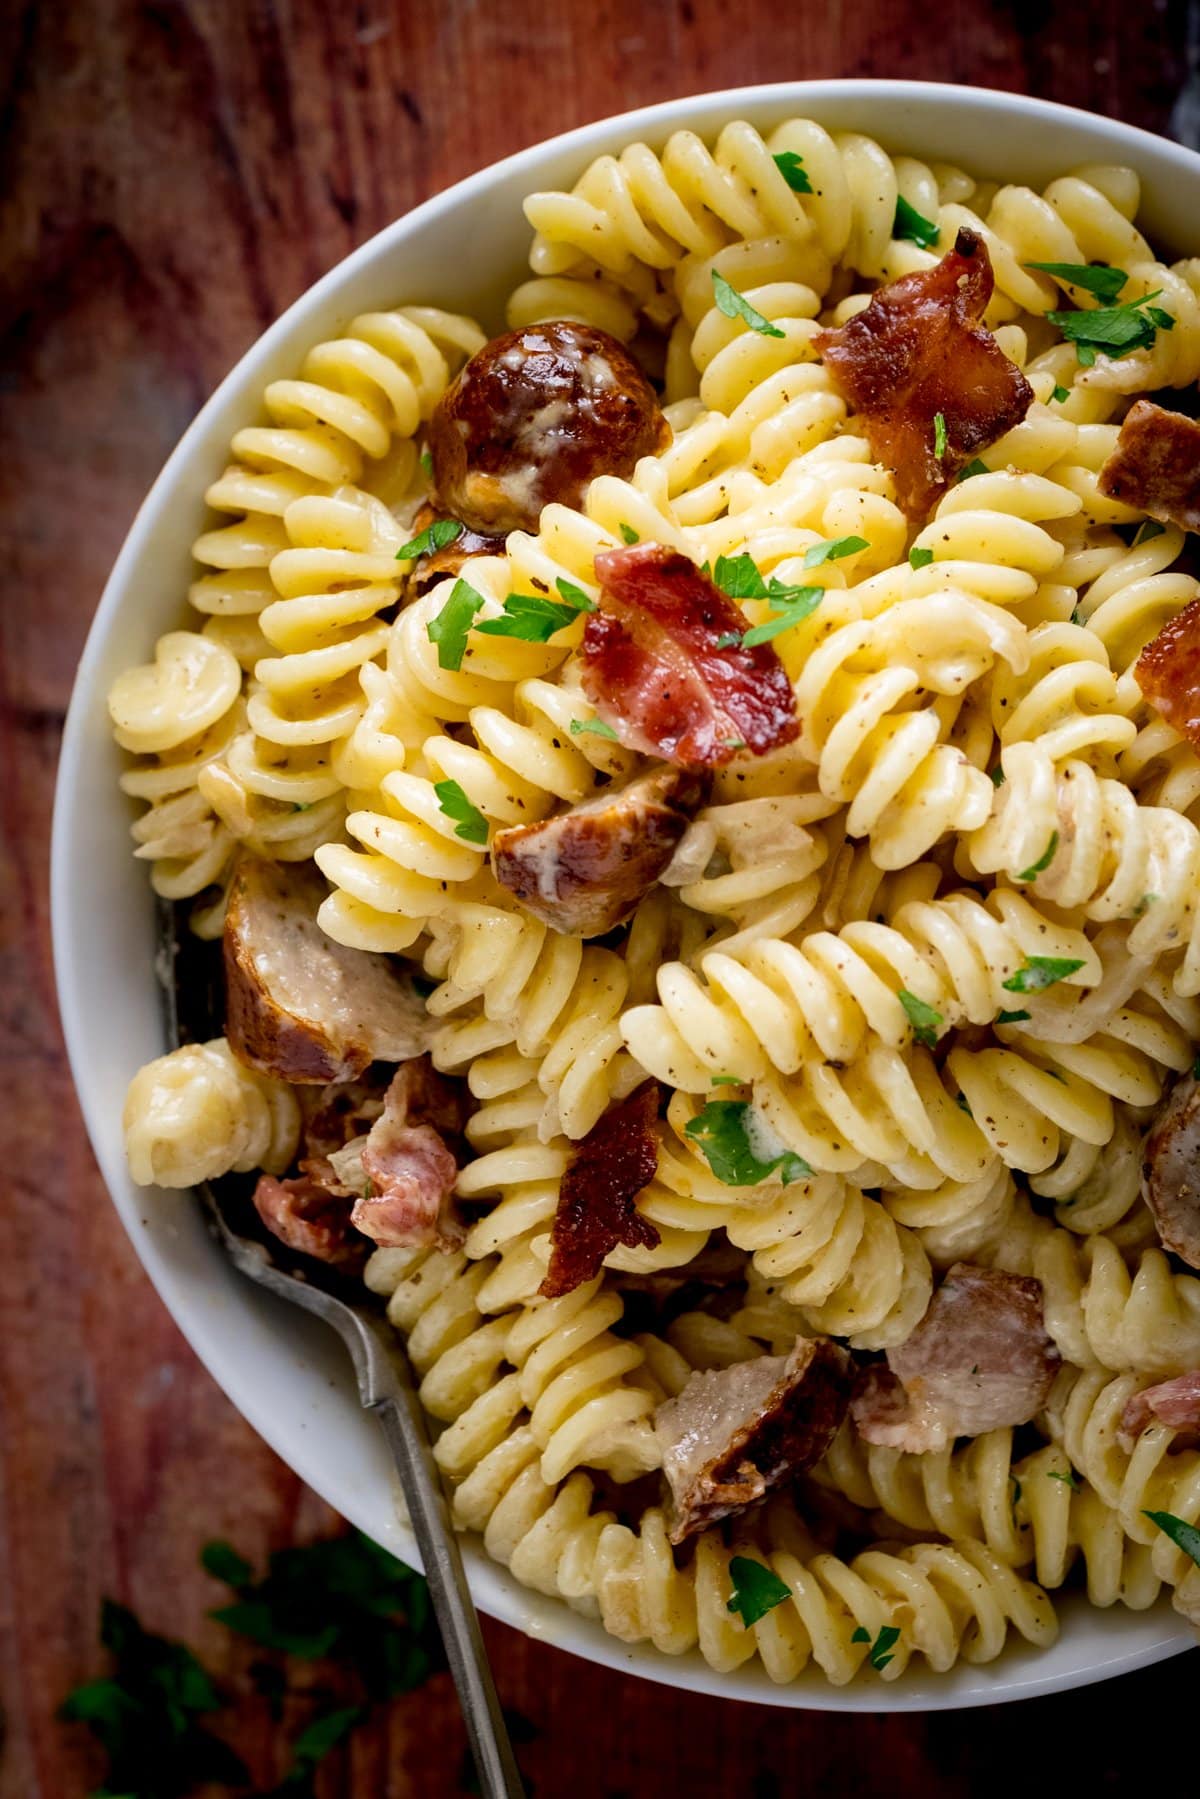 creamy pasta with sausage and bacon topped with parsley in a white bowl on a wooden background.